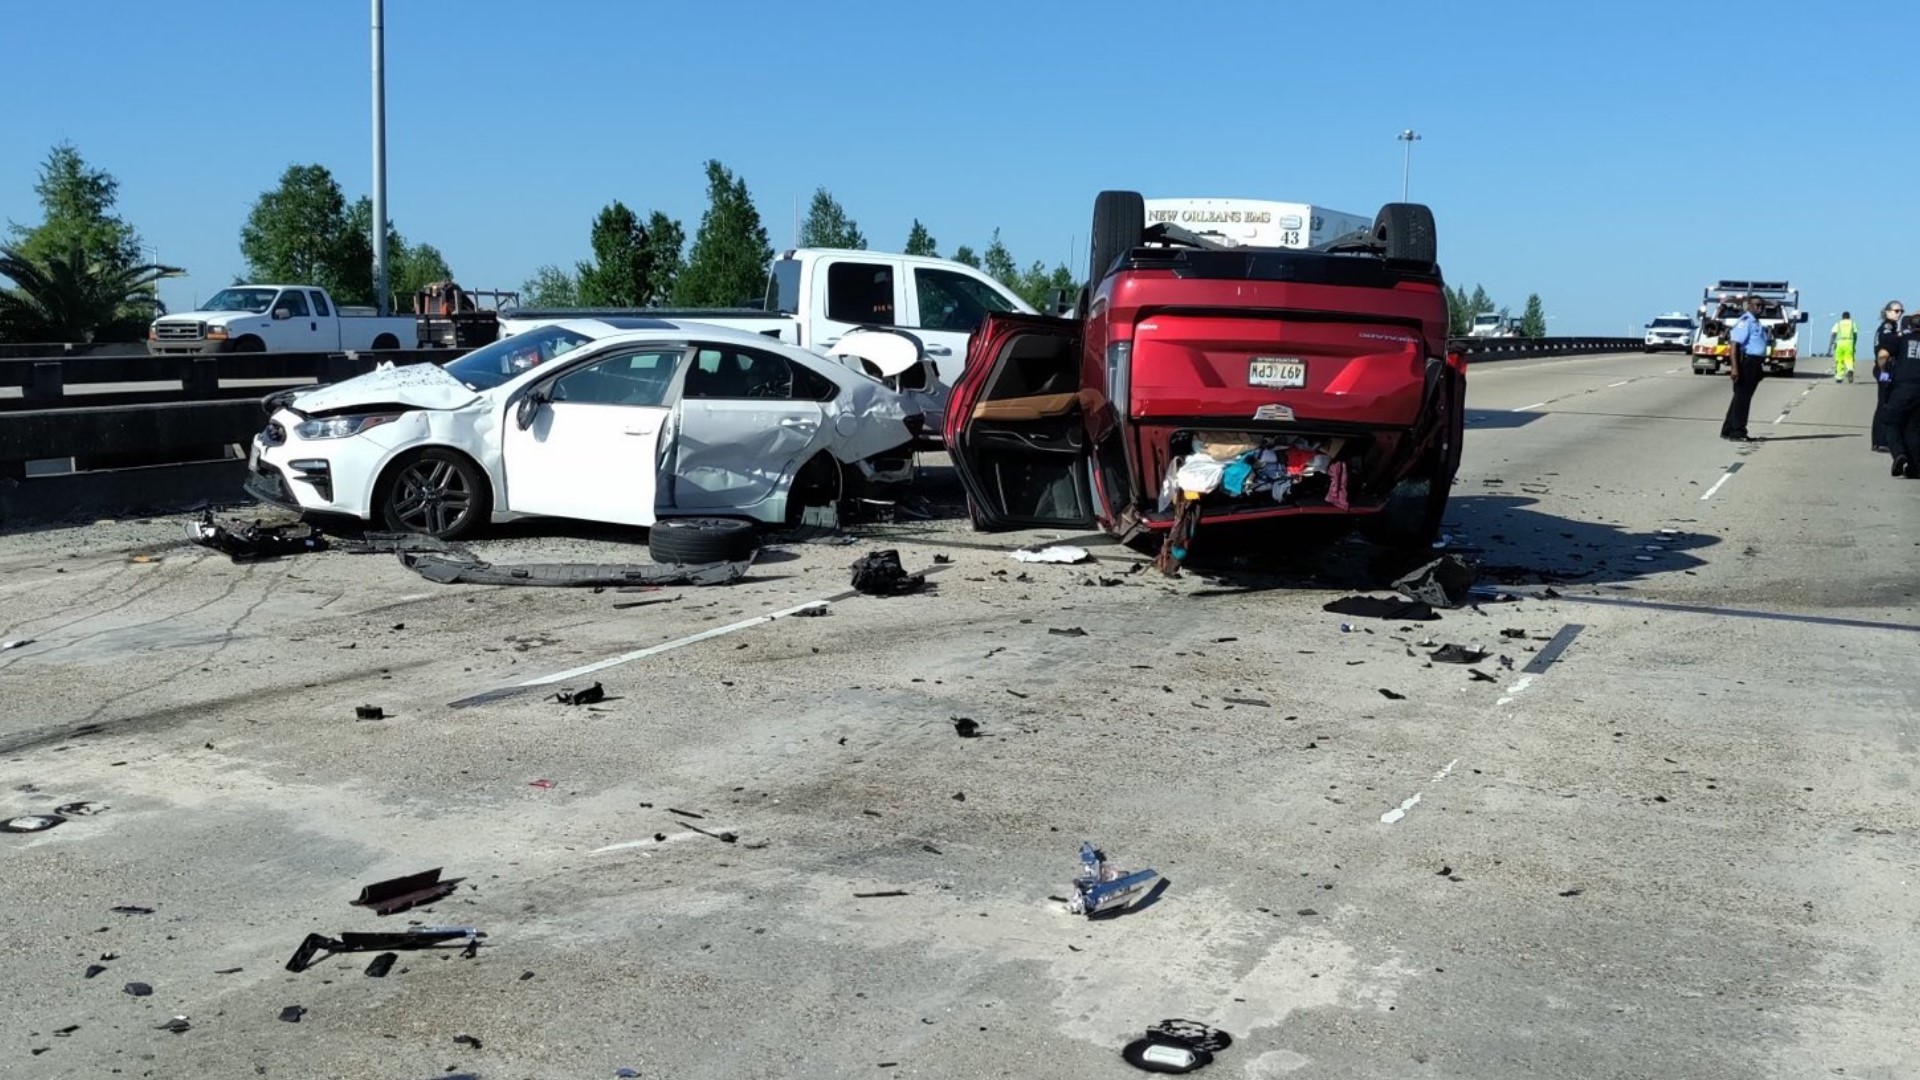 According to the New Orleans Police Department, the crash happened shortly before 8:30 a.m. near I-10 West and Crowder Boulevard.